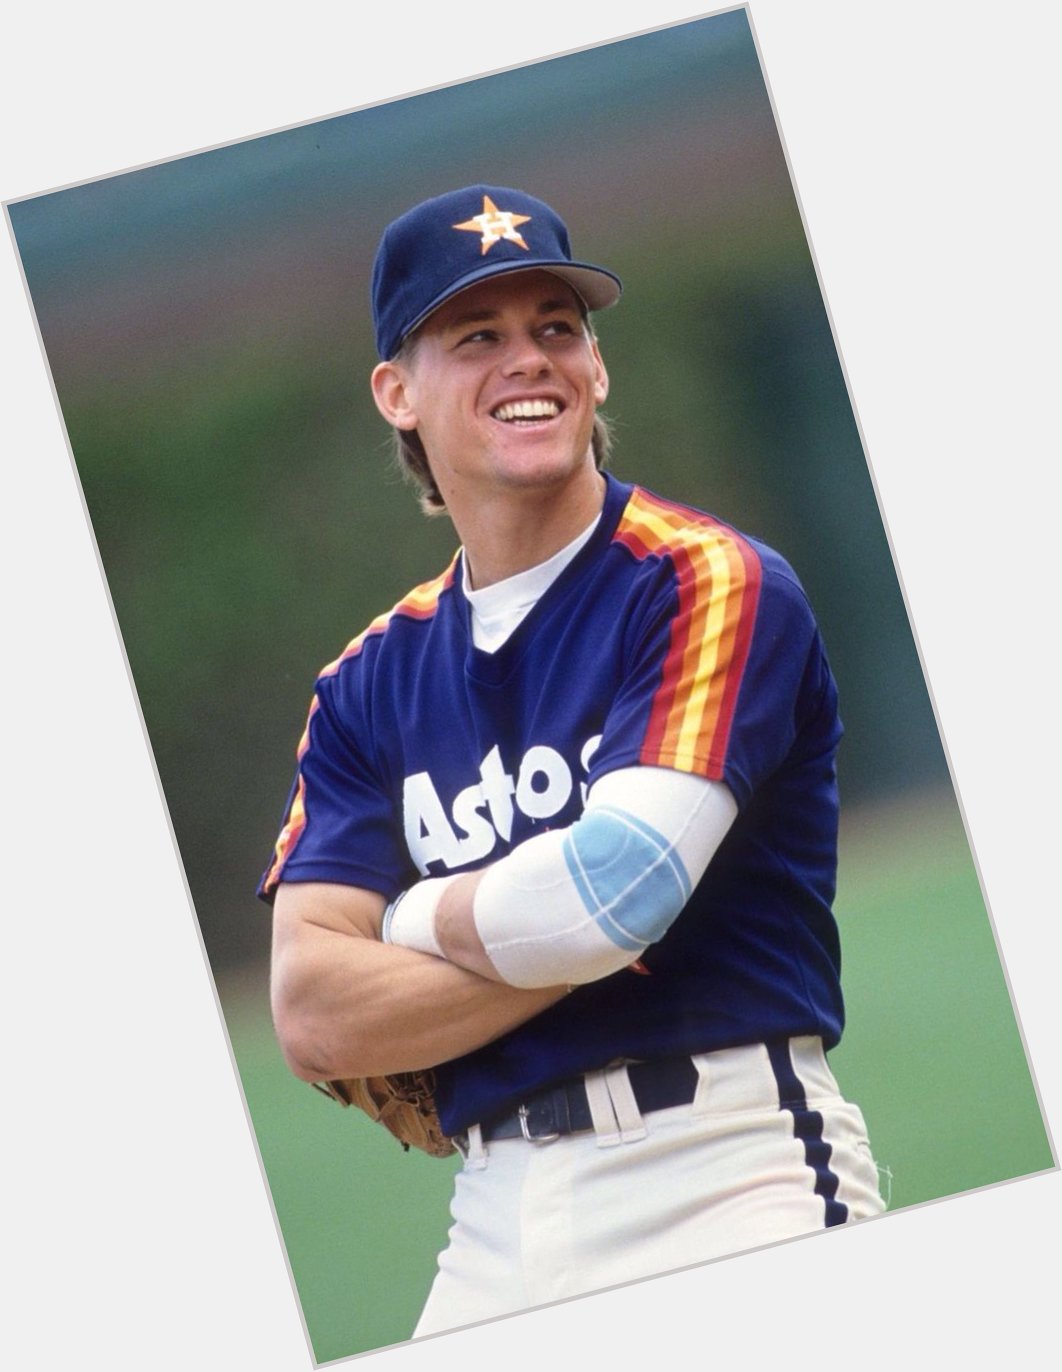 Happy 55th birthday to the baseball Hall of Famer, and Astros great, Craig Biggio! 